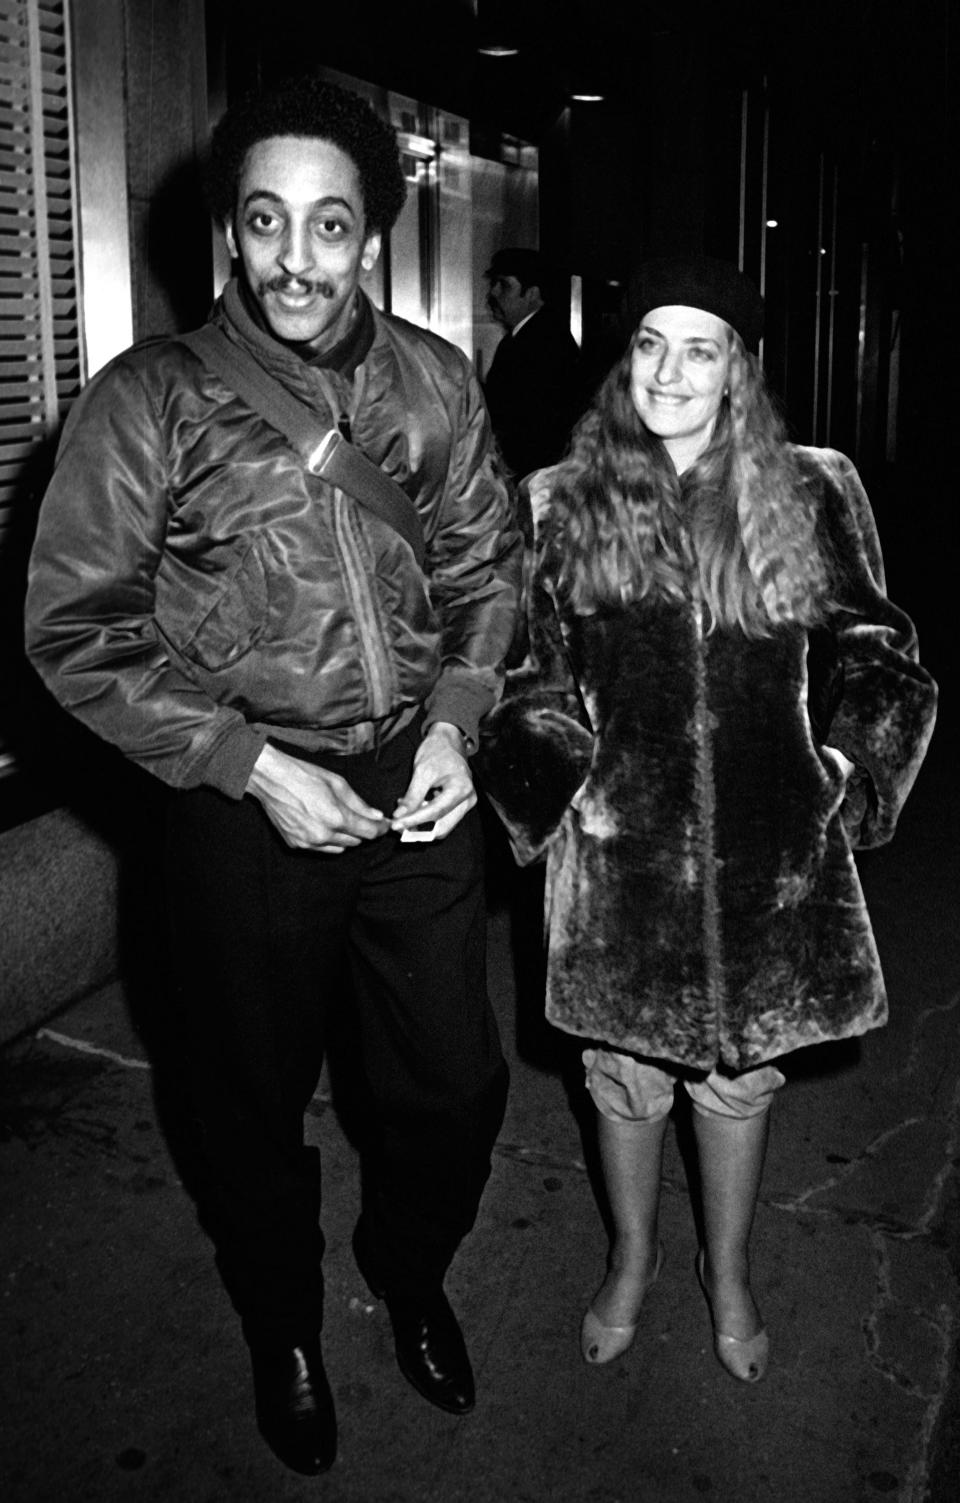 Gregory Hines and his wife at The Odeon in New York City.